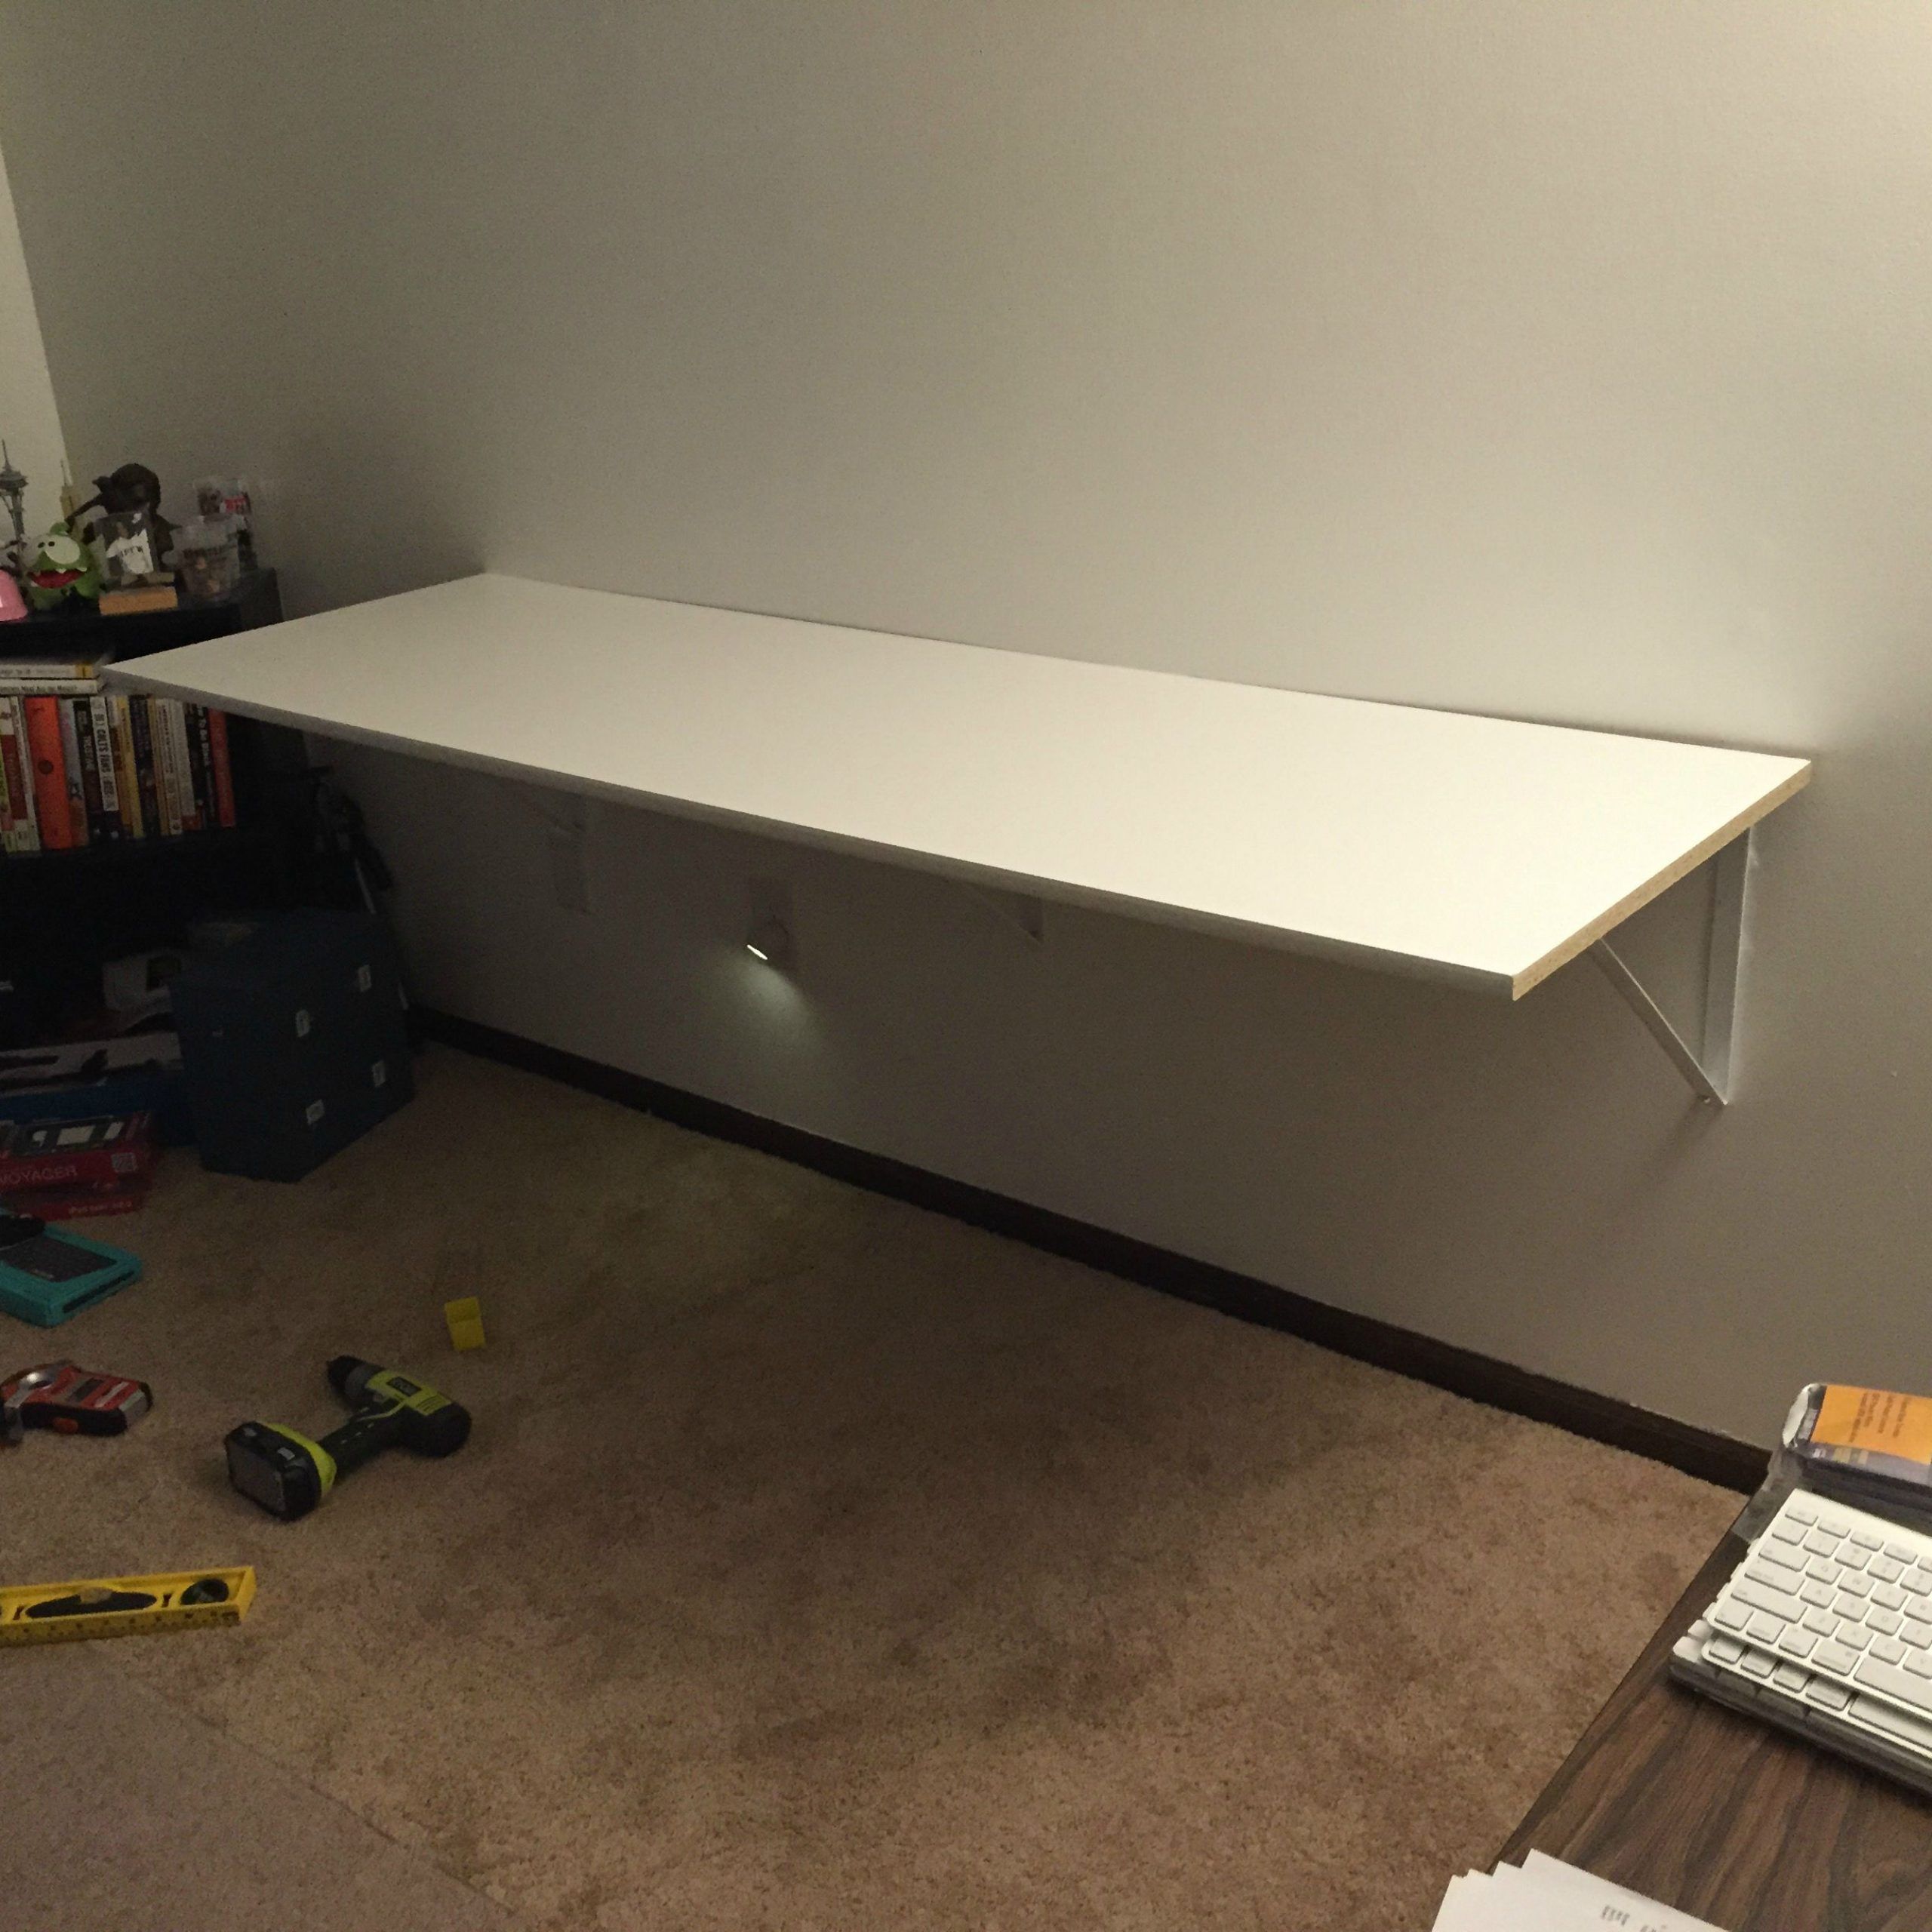 Wall Mounted Desk For Computer: The Hints You Need When Choosing Throughout Matte White Wall Mount Desks (View 12 of 15)